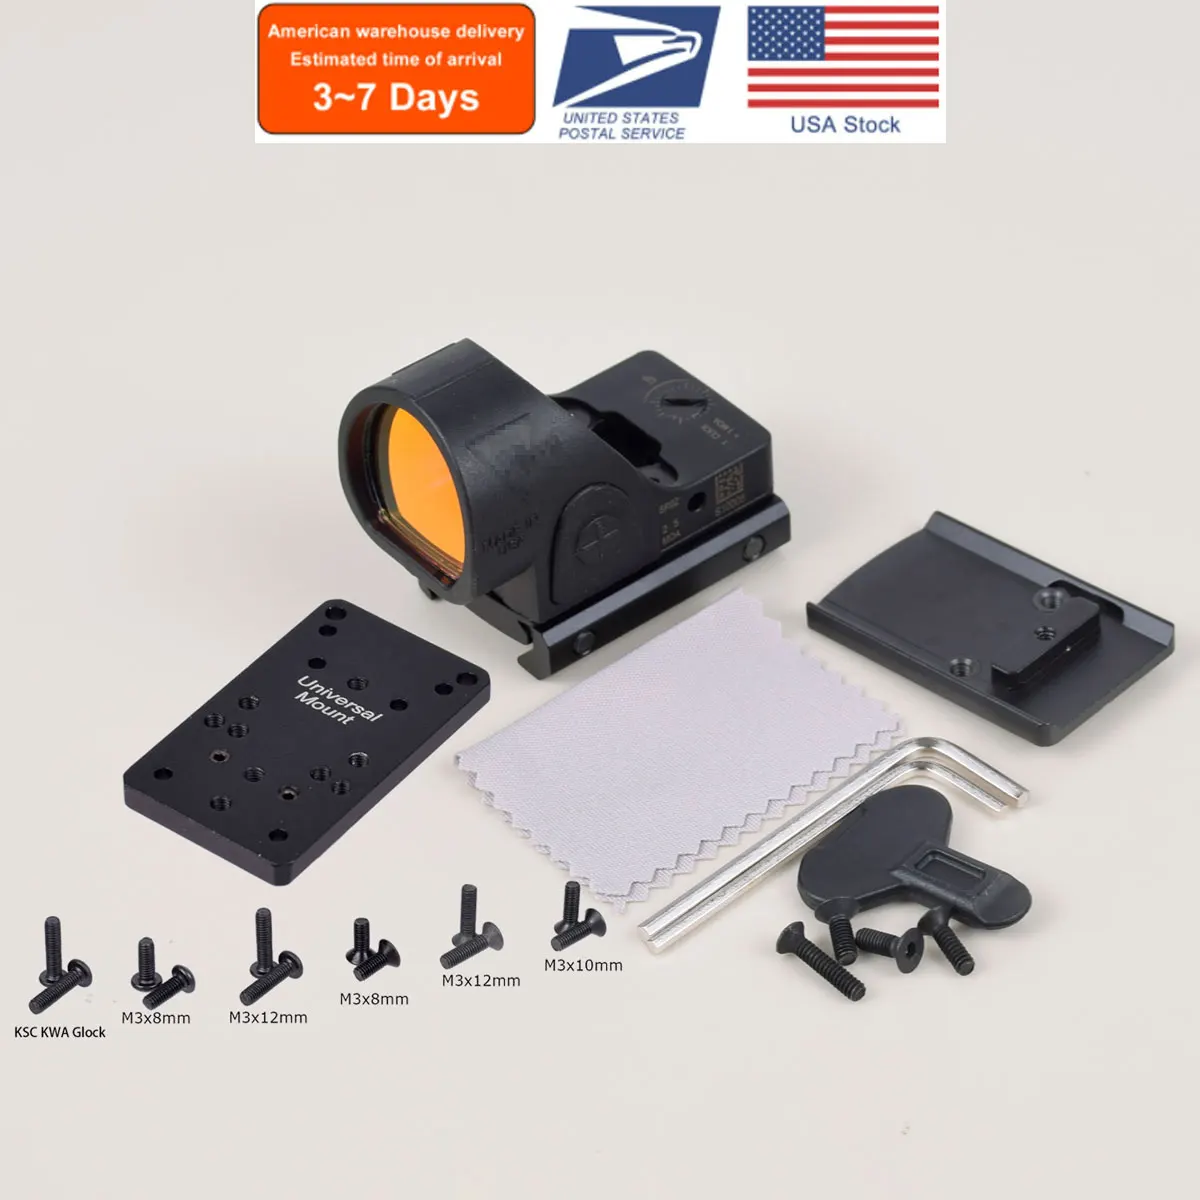 

US Warehouse Tactical Trijicon SRO Red Dot Sight Reflex Scope with Mount Plate RMR Footprint For Mos Glock Hunting Gun